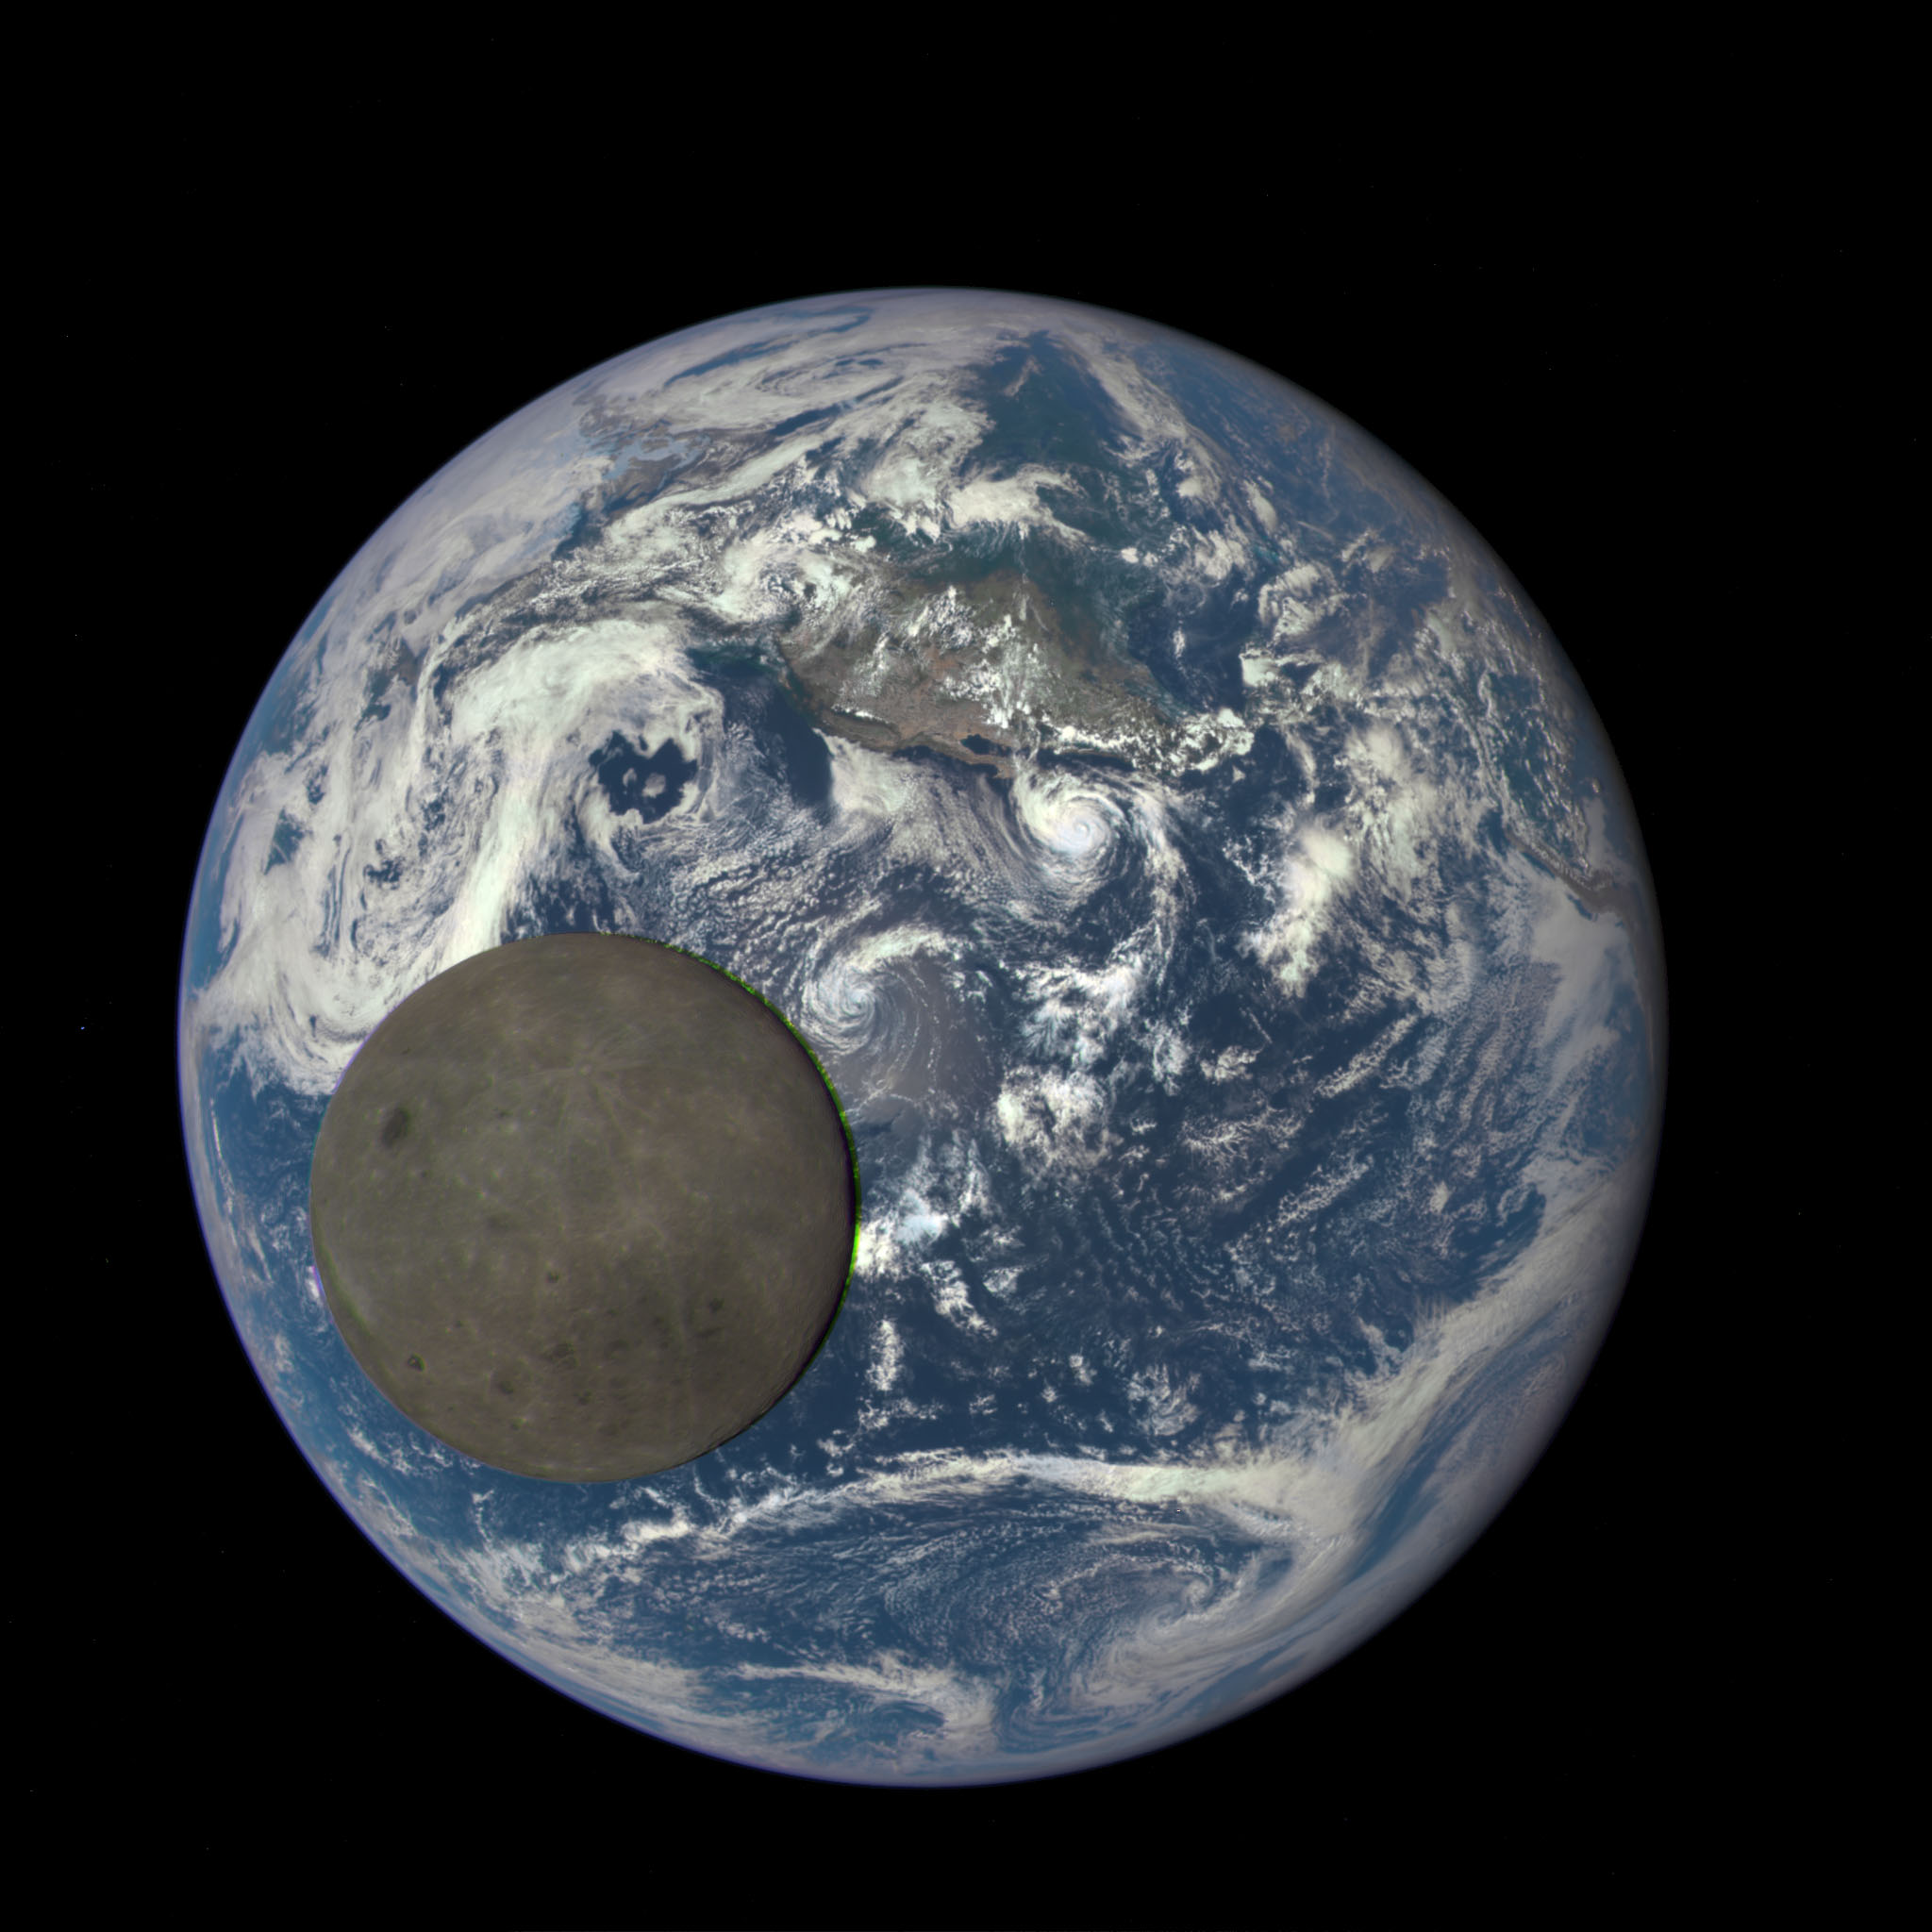 Moon Crosses Earth: an image of the dark side of the moon framed against the larger Earth. Credit: NASA/NOAA